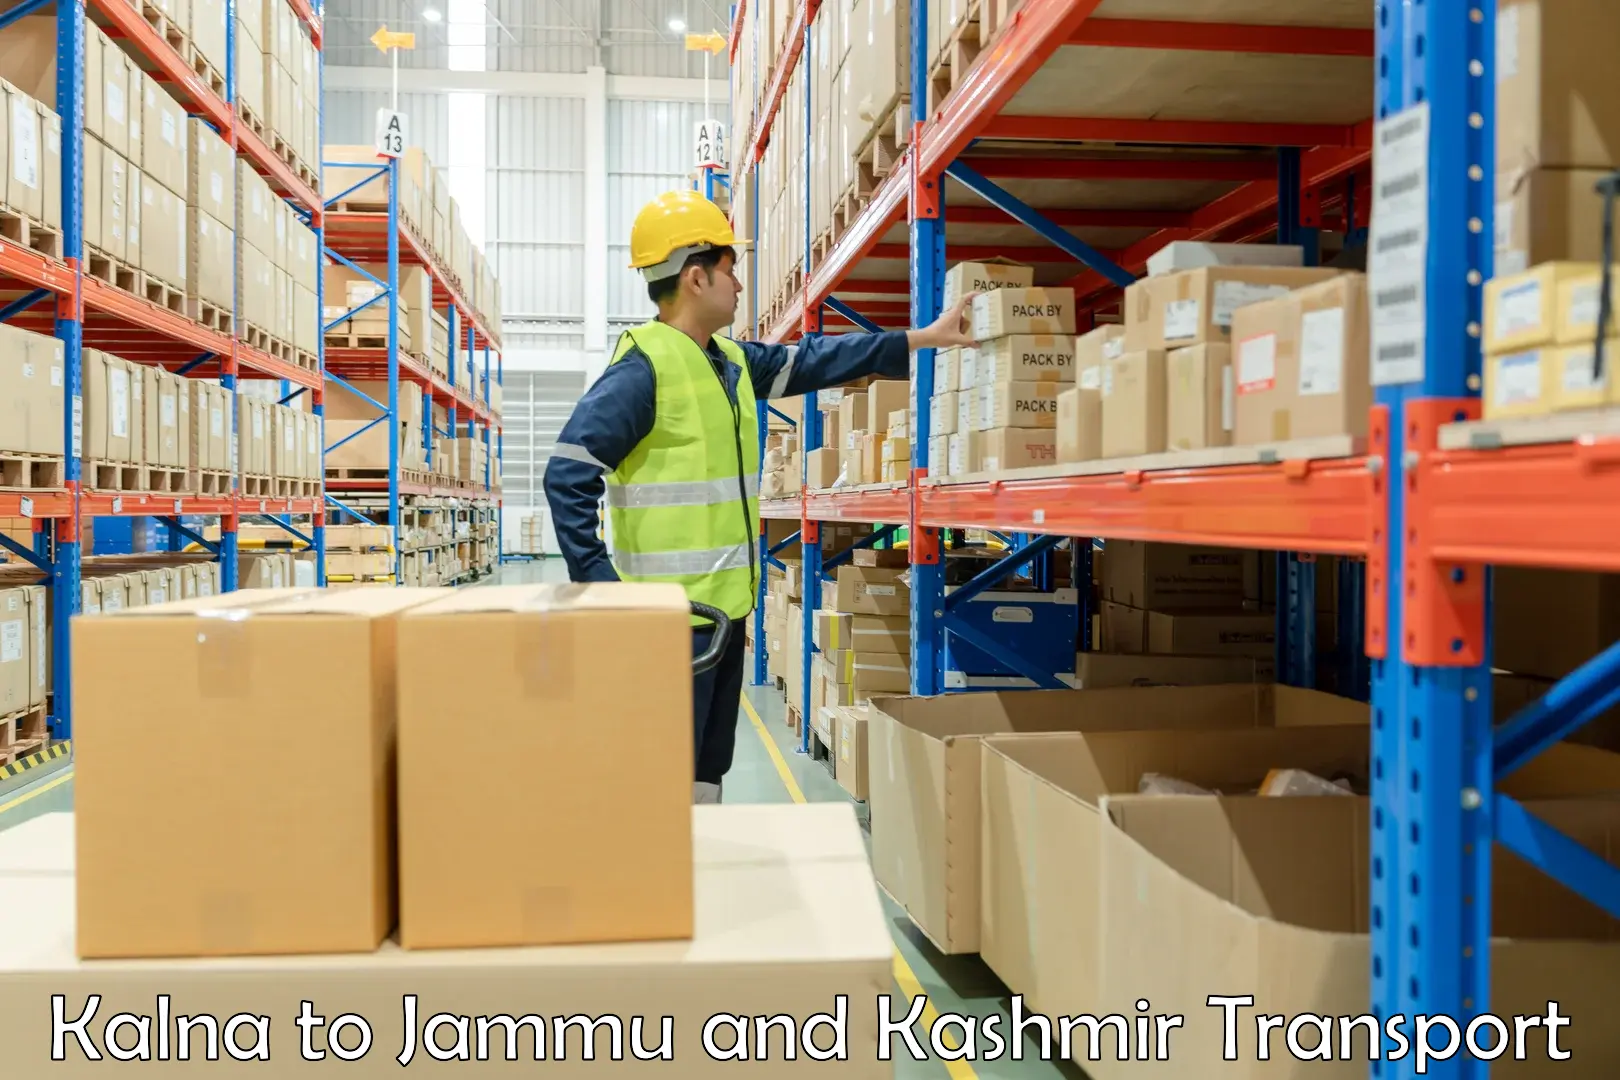 Express transport services in Kalna to Udhampur